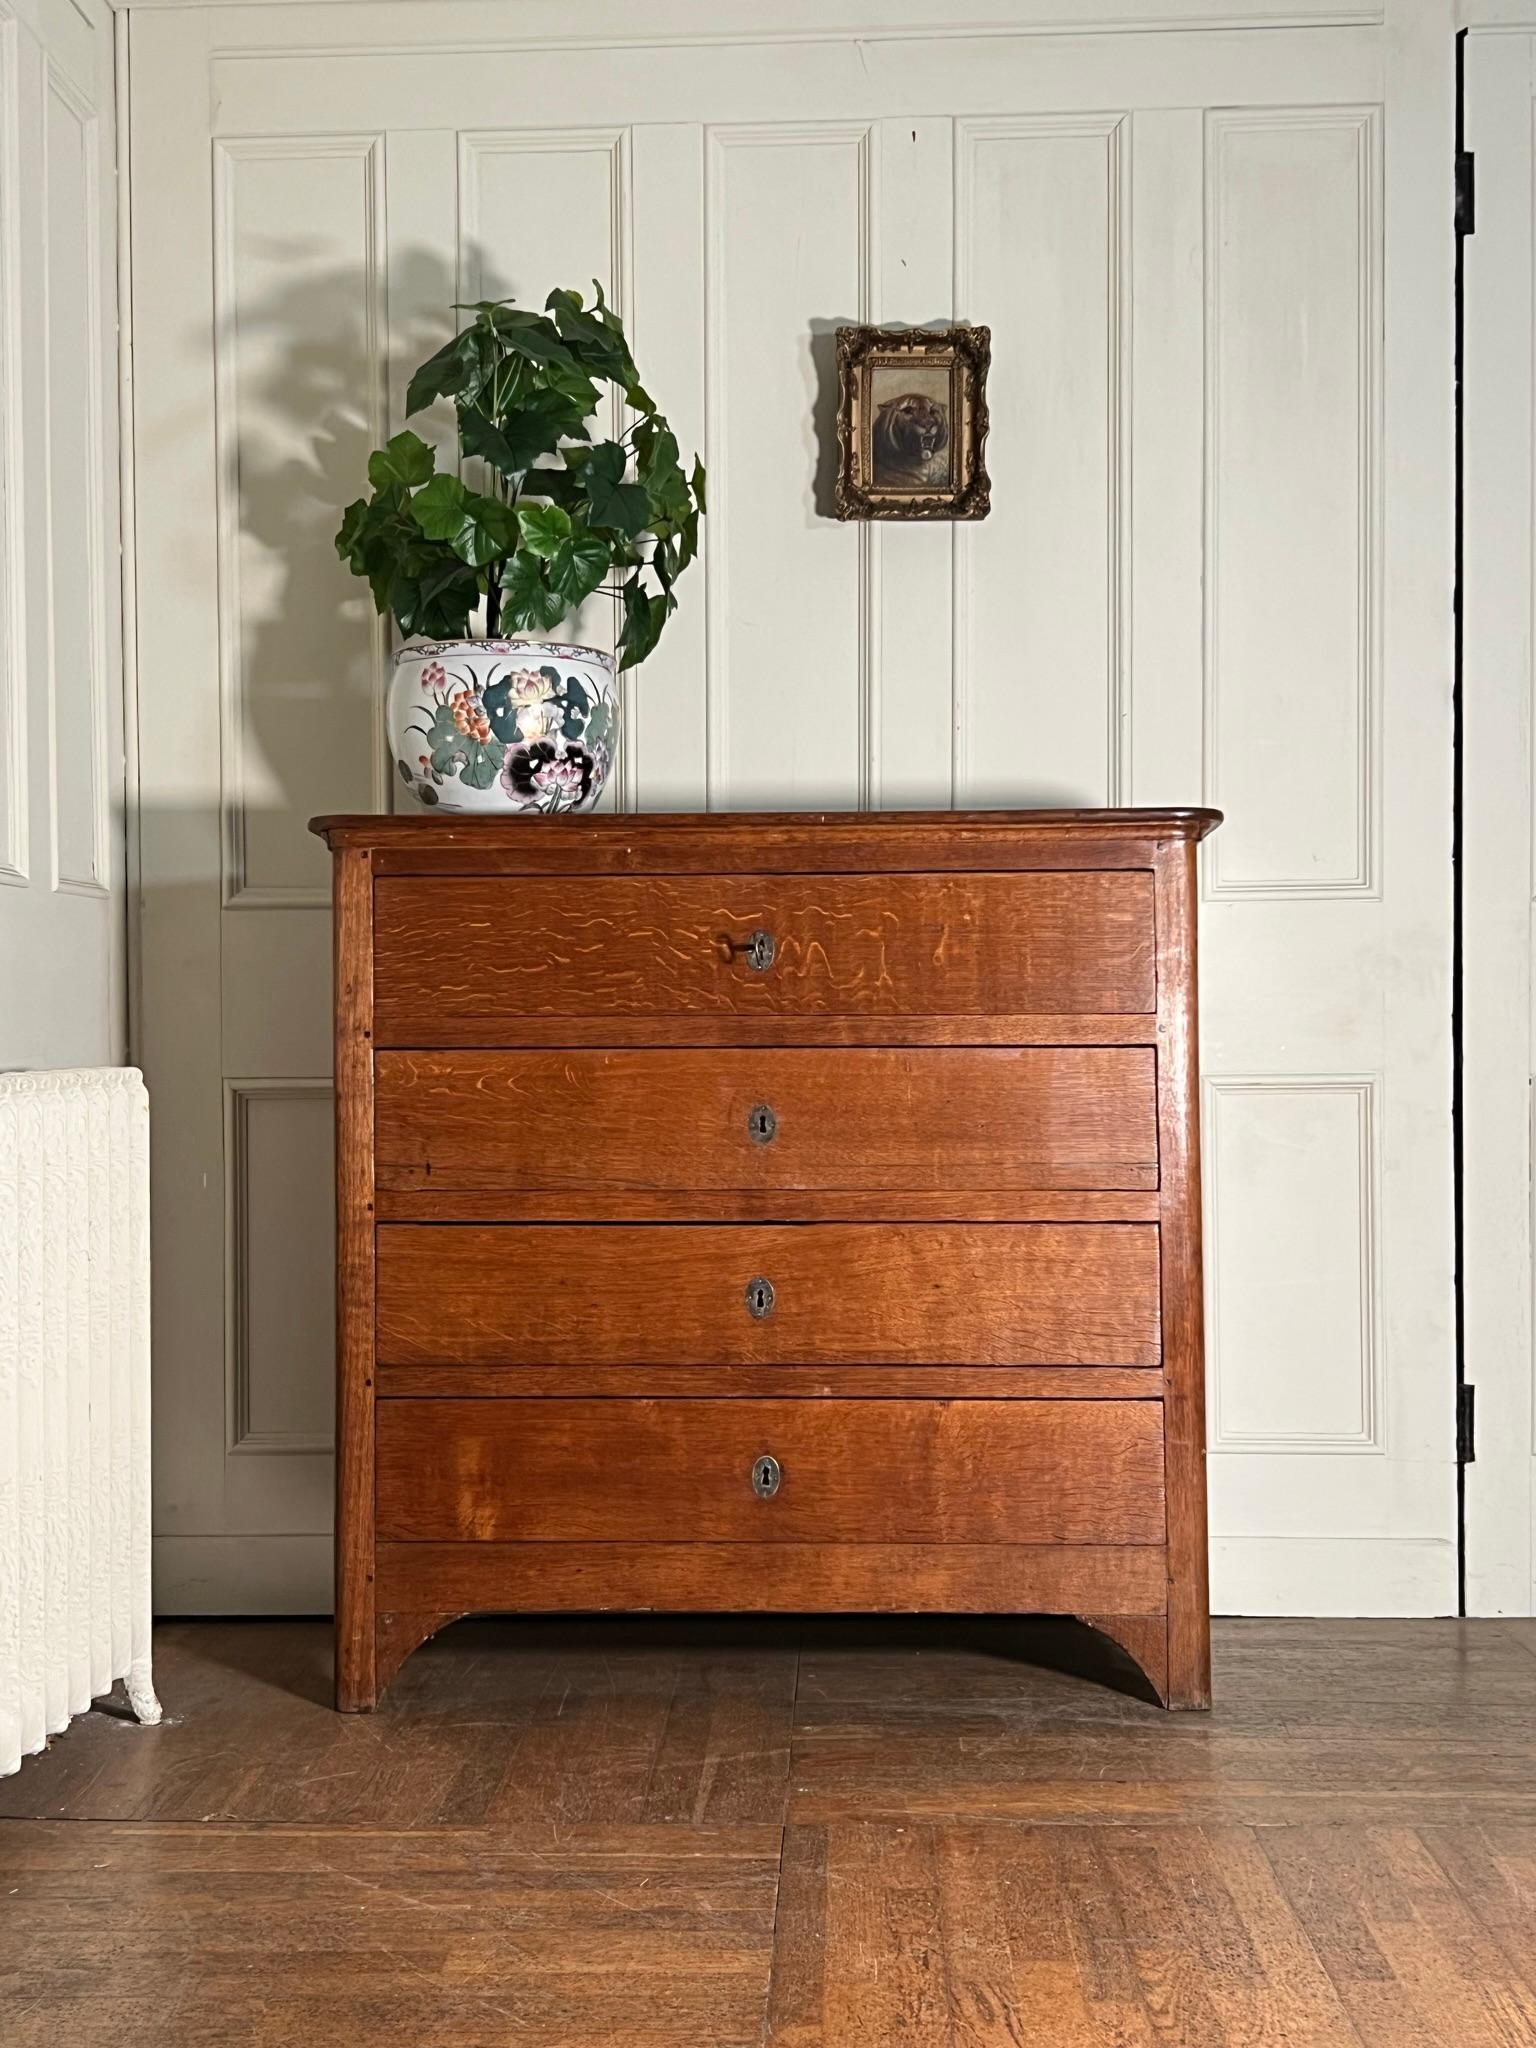 Full oak construction.

Good high chest but narrow making it good for a hallway.

Quarter sawn oak.

Locks missing but supplied with a key for opening the drawers.

Some marks to the top as shown but overall good condition.

French 19th